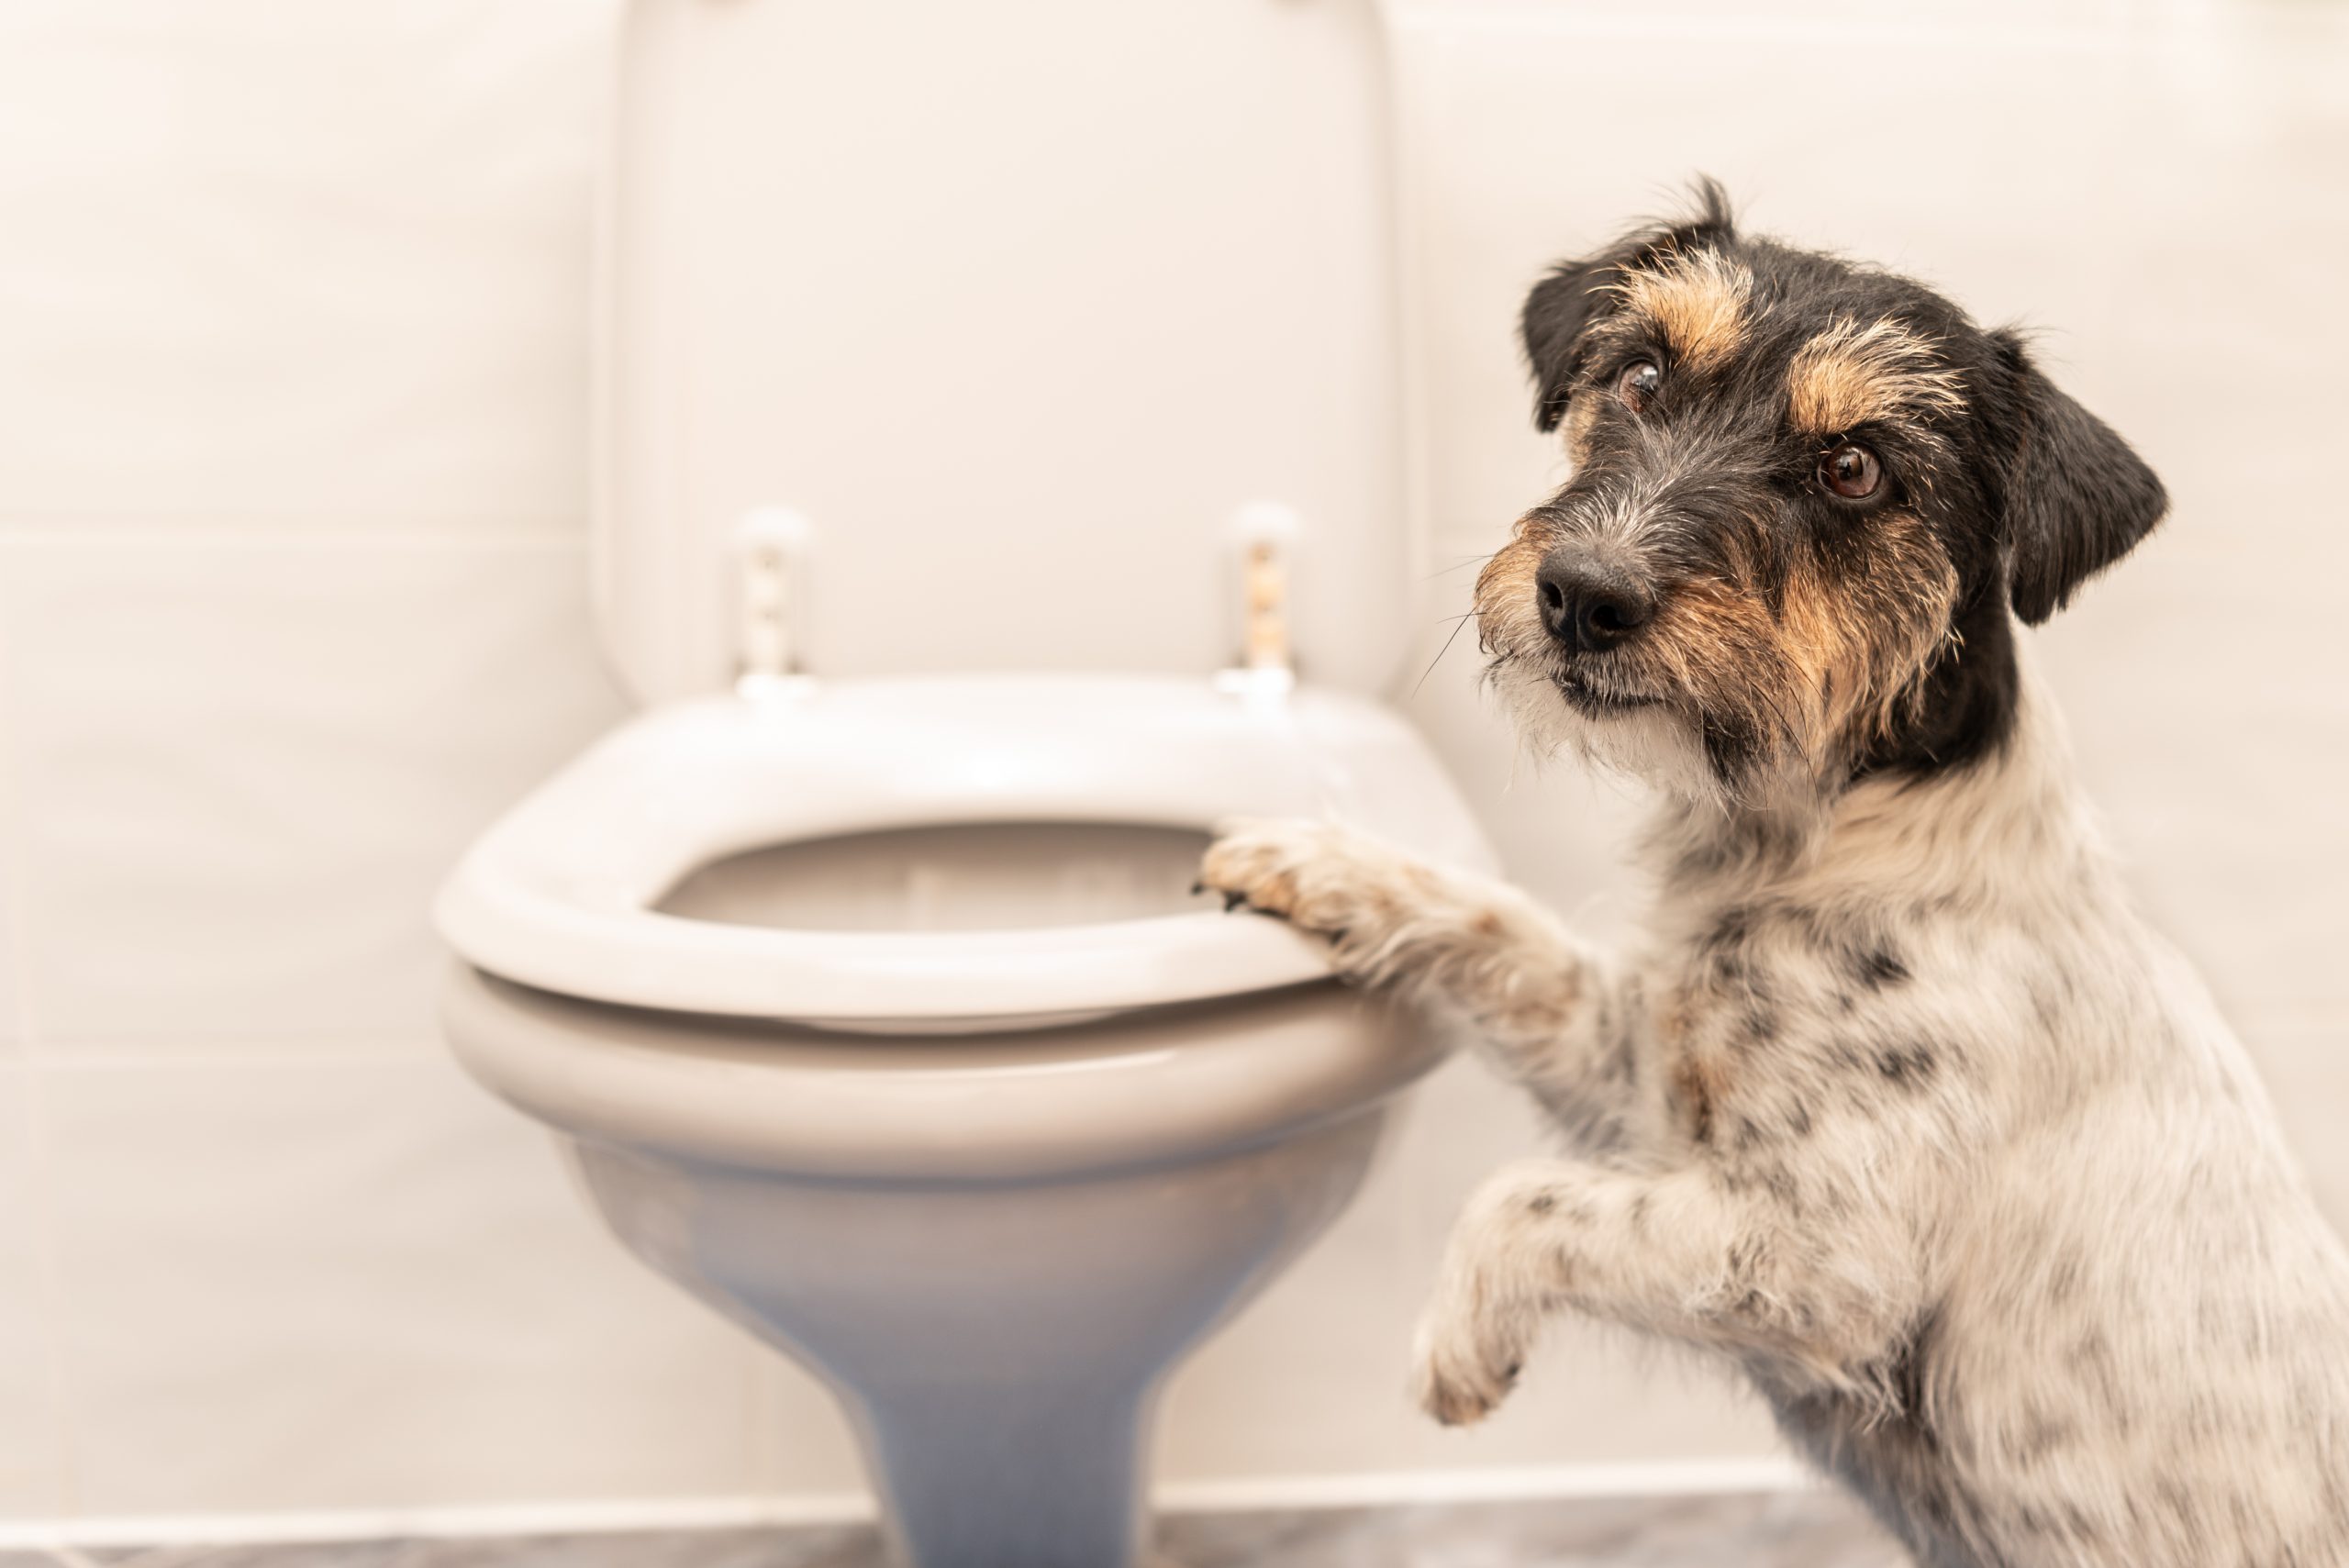 Is It Bad for Dogs to Drink Toilet Water? | Reader's Digest